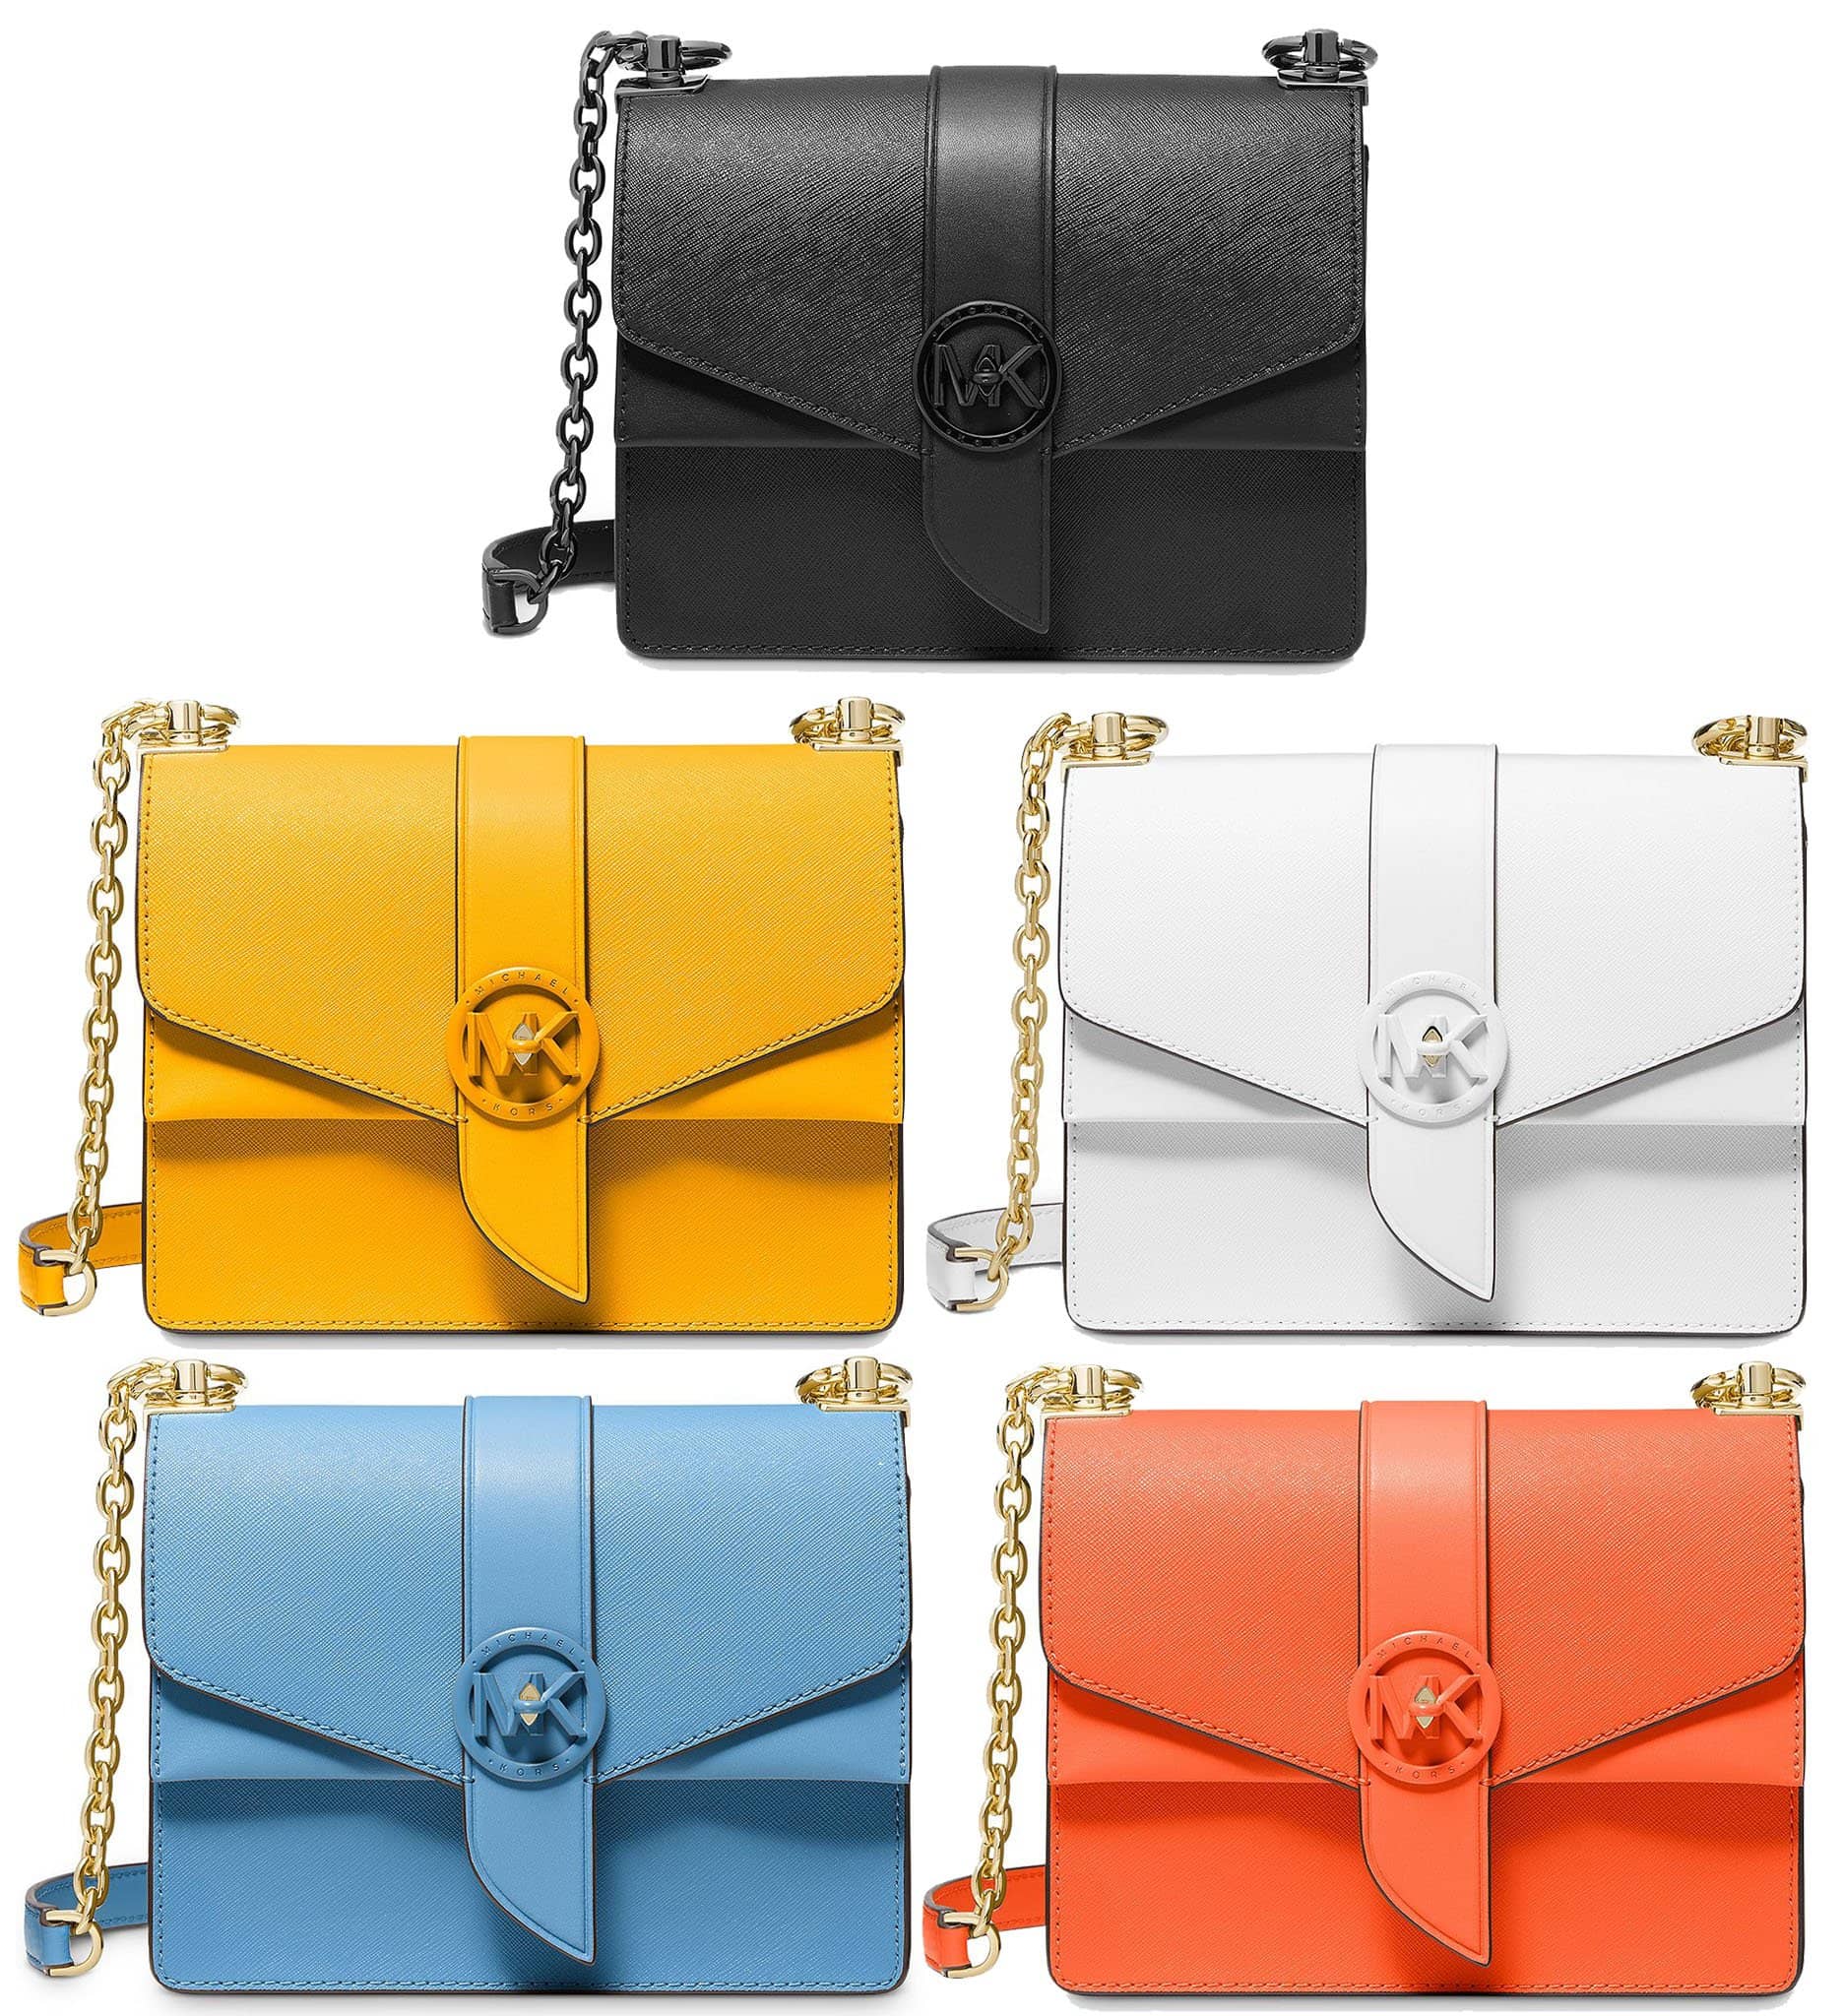 Give your look a sleek, polished finish with the Michael Kors Greenwich crossbody bag, available in multiple colors